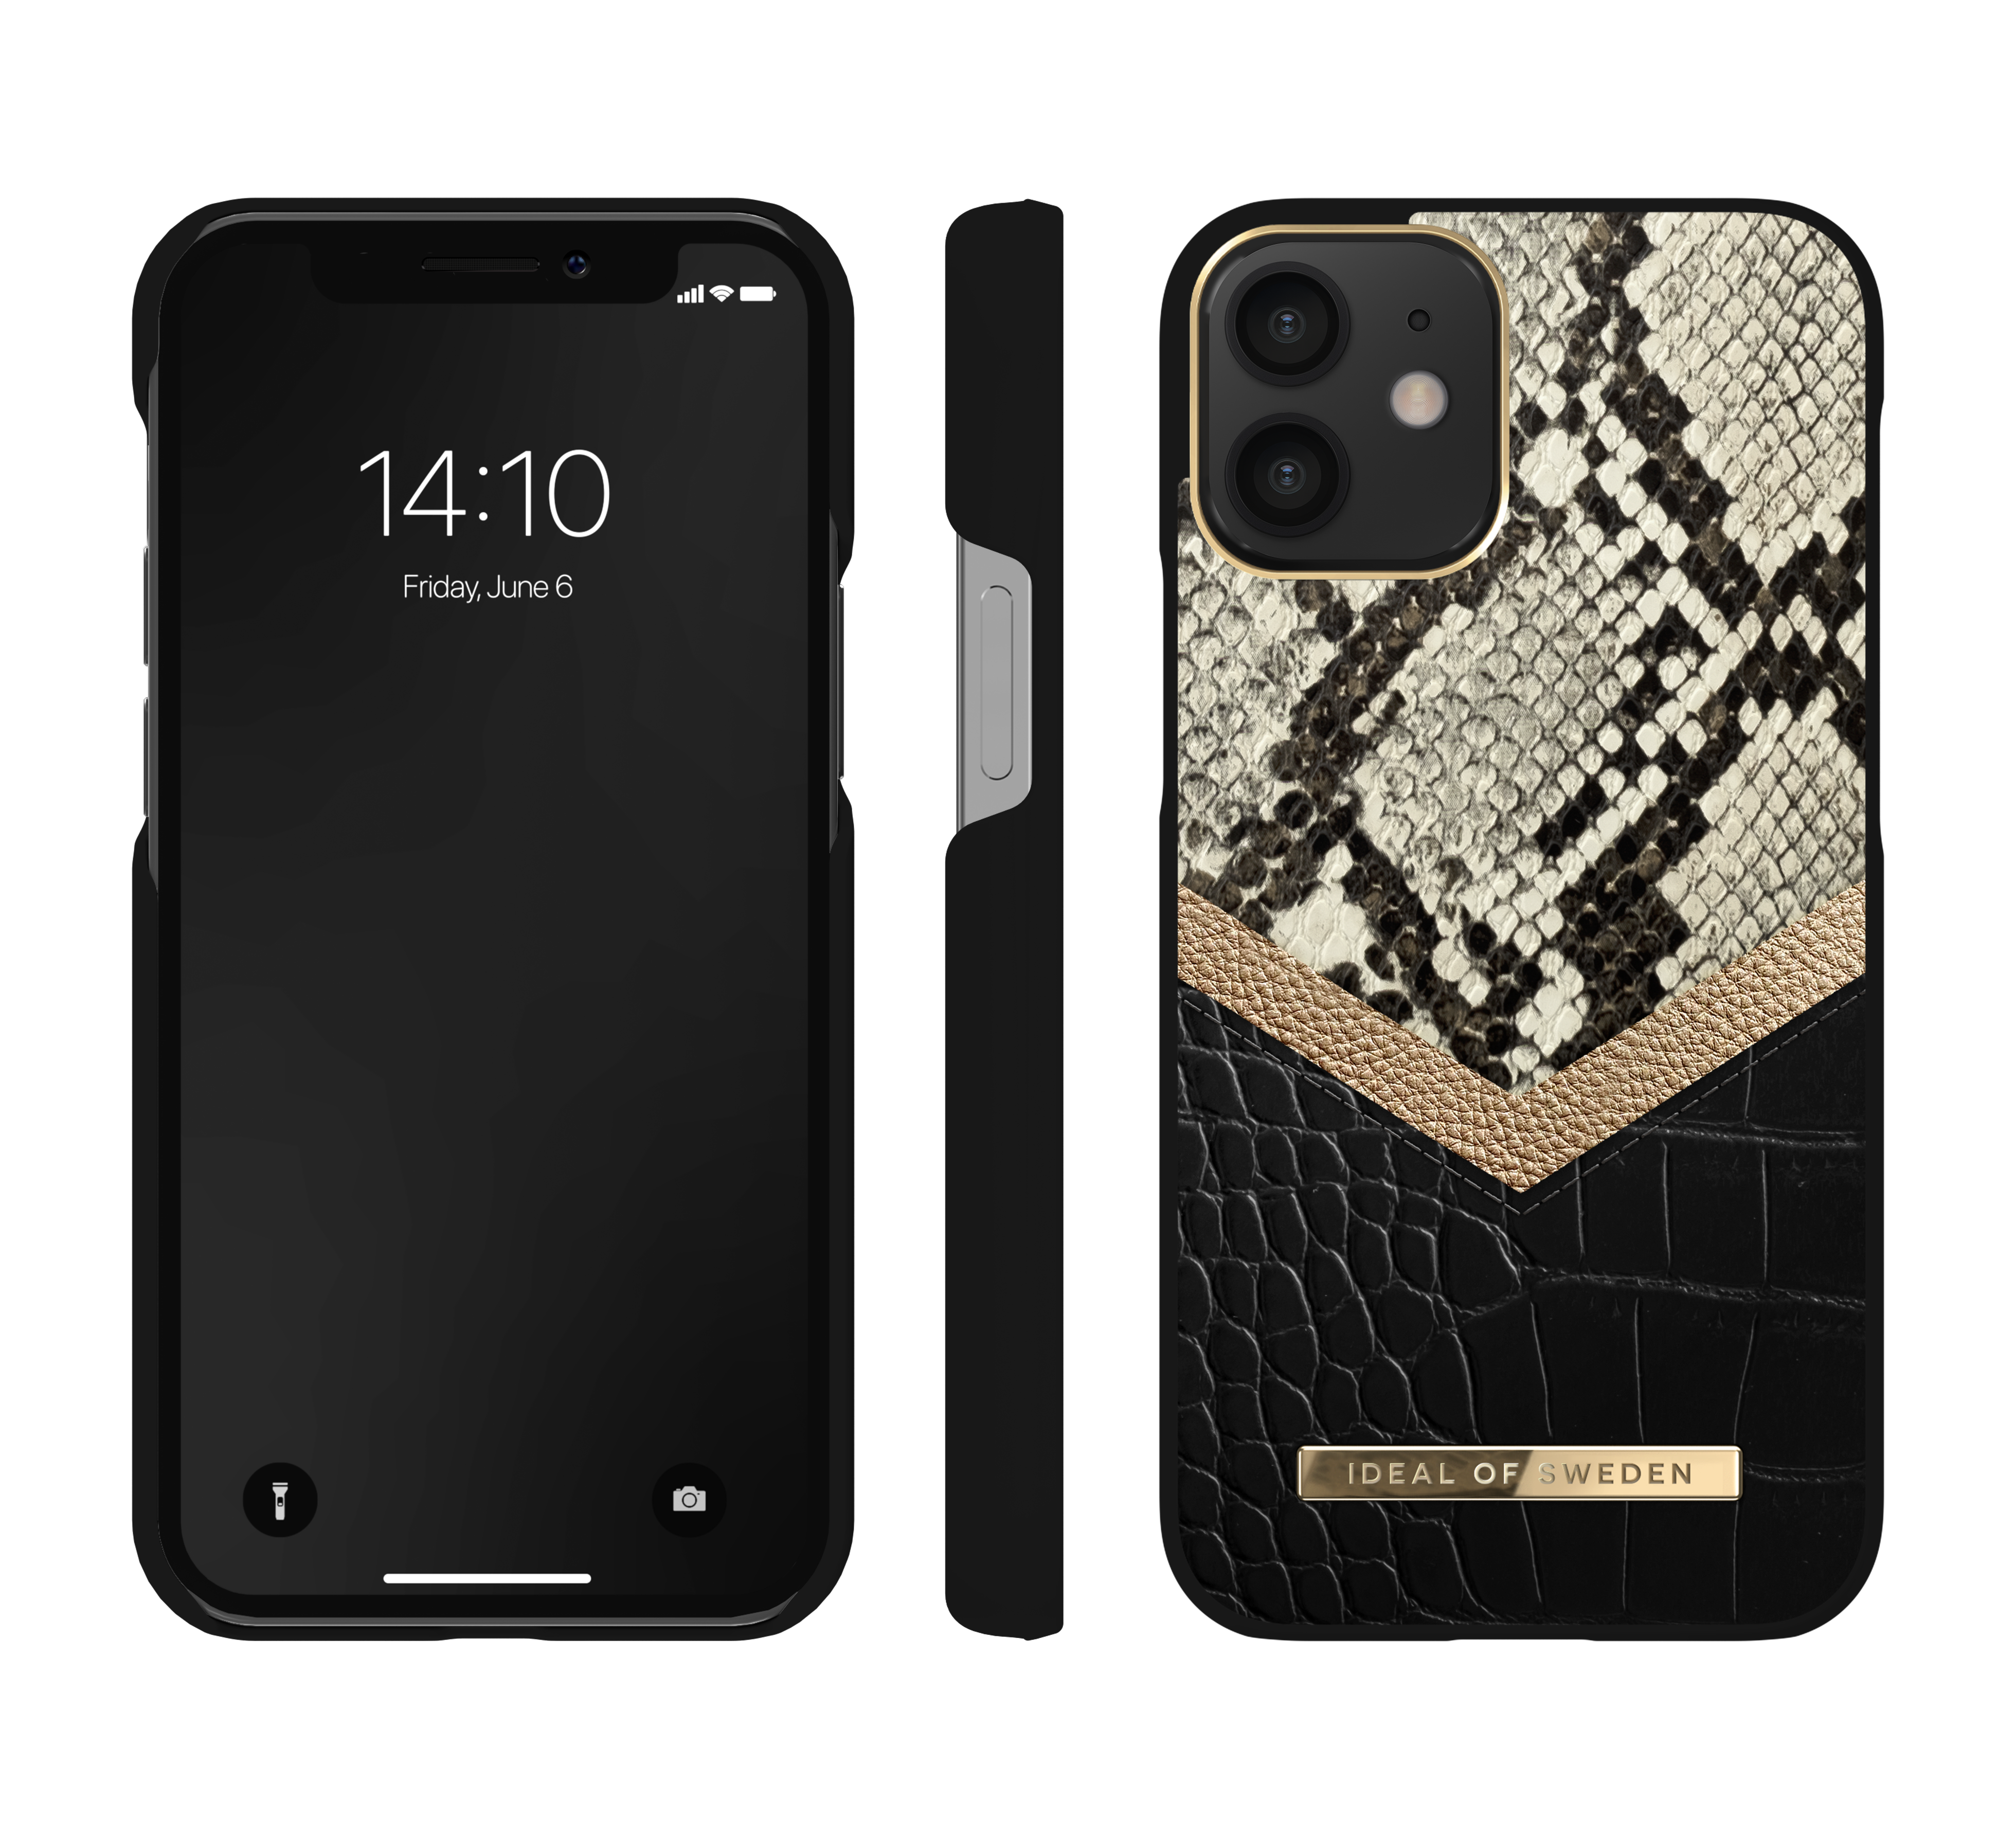 Mini, Backcover, Apple, Midnight OF IDEAL 12 Python SWEDEN IDACSS20-I2054-199, IPhone